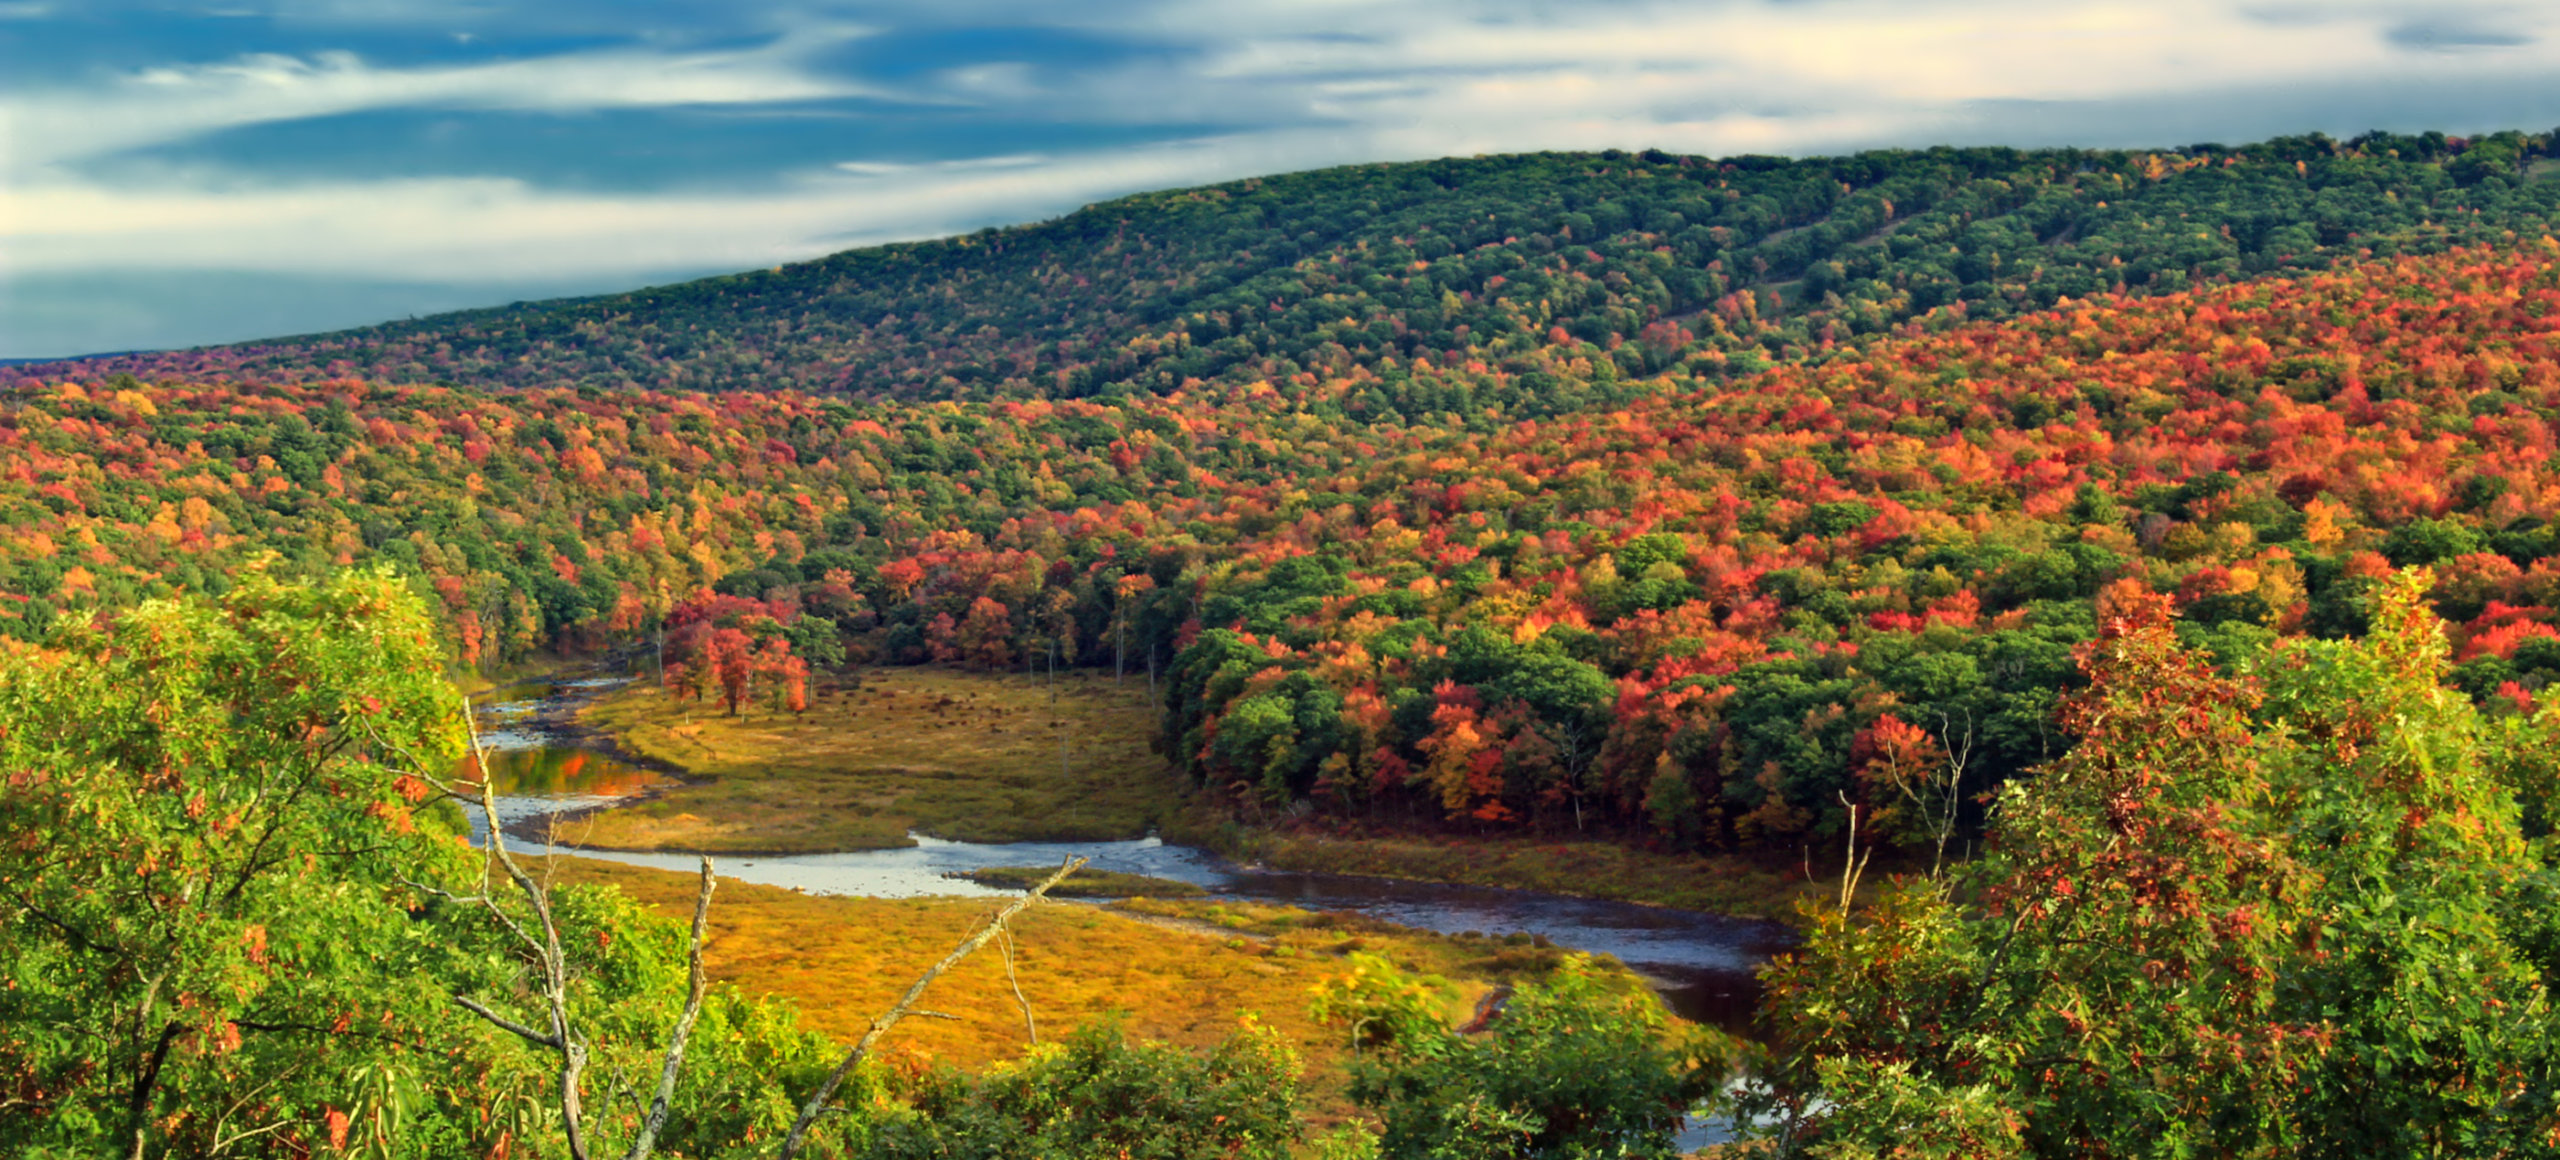 An autumn landscape of colorful trees on hills under a blue sky. A clearing in the middle show a meadow and water.